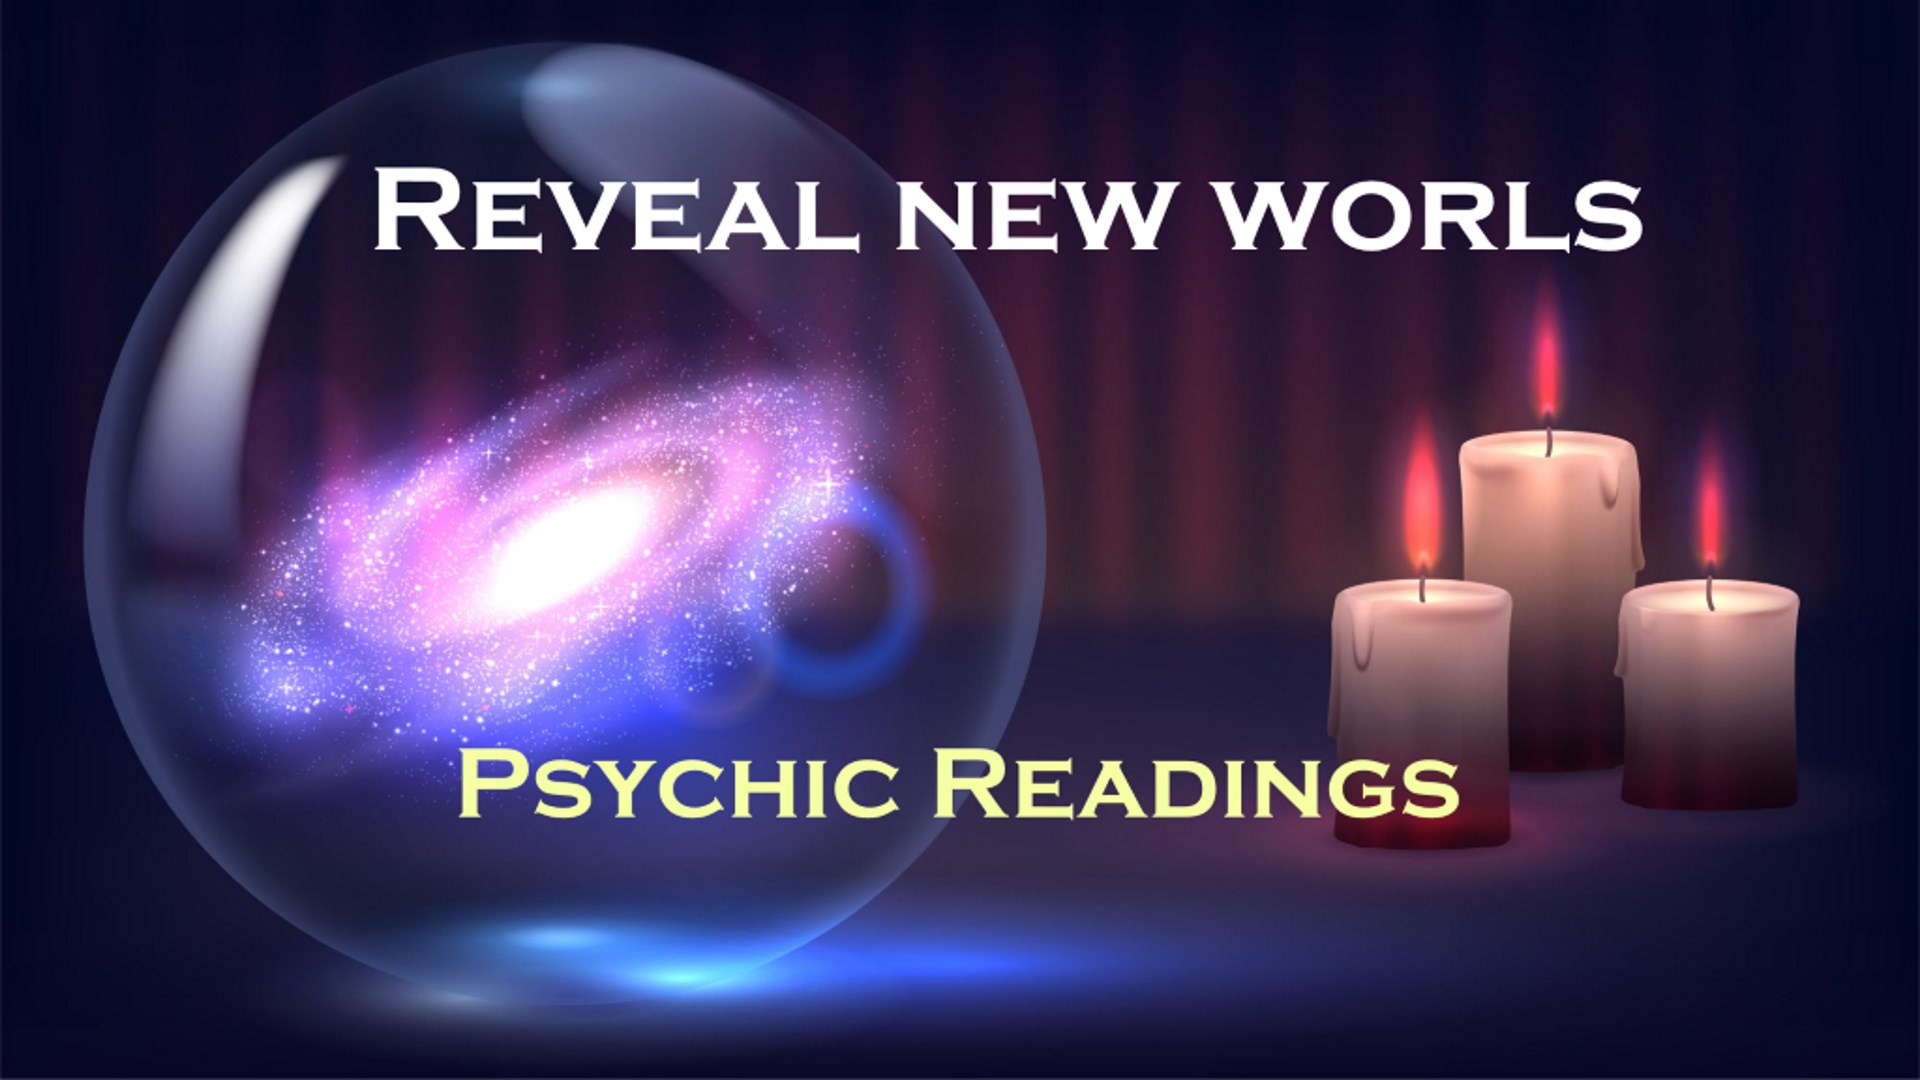 Free live psychic reading: Get an Instant Reading from a Top Psychic